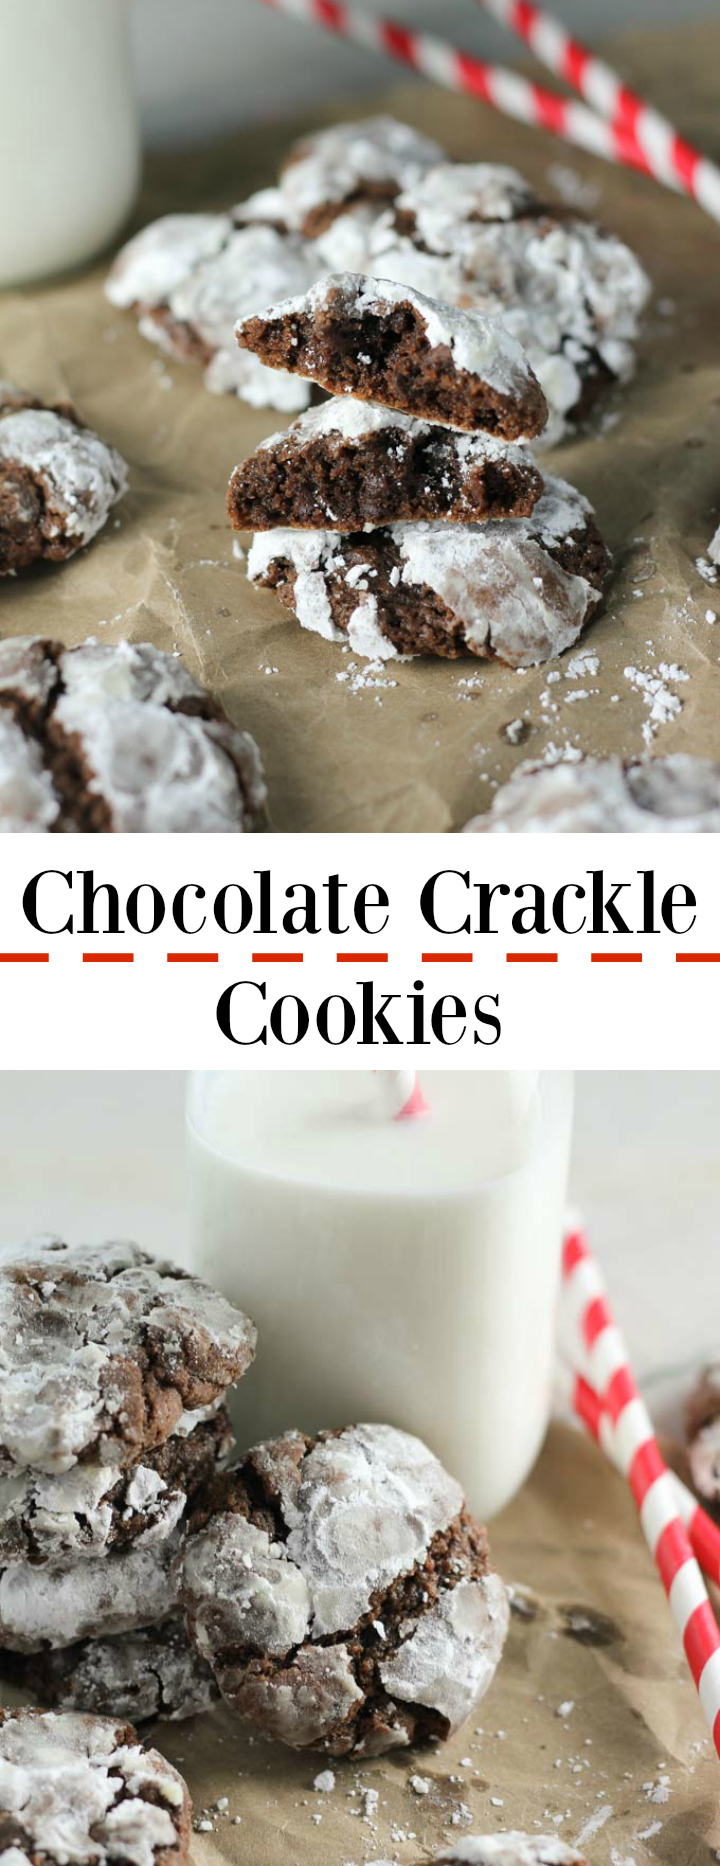 Chocolate Crackle Cookie